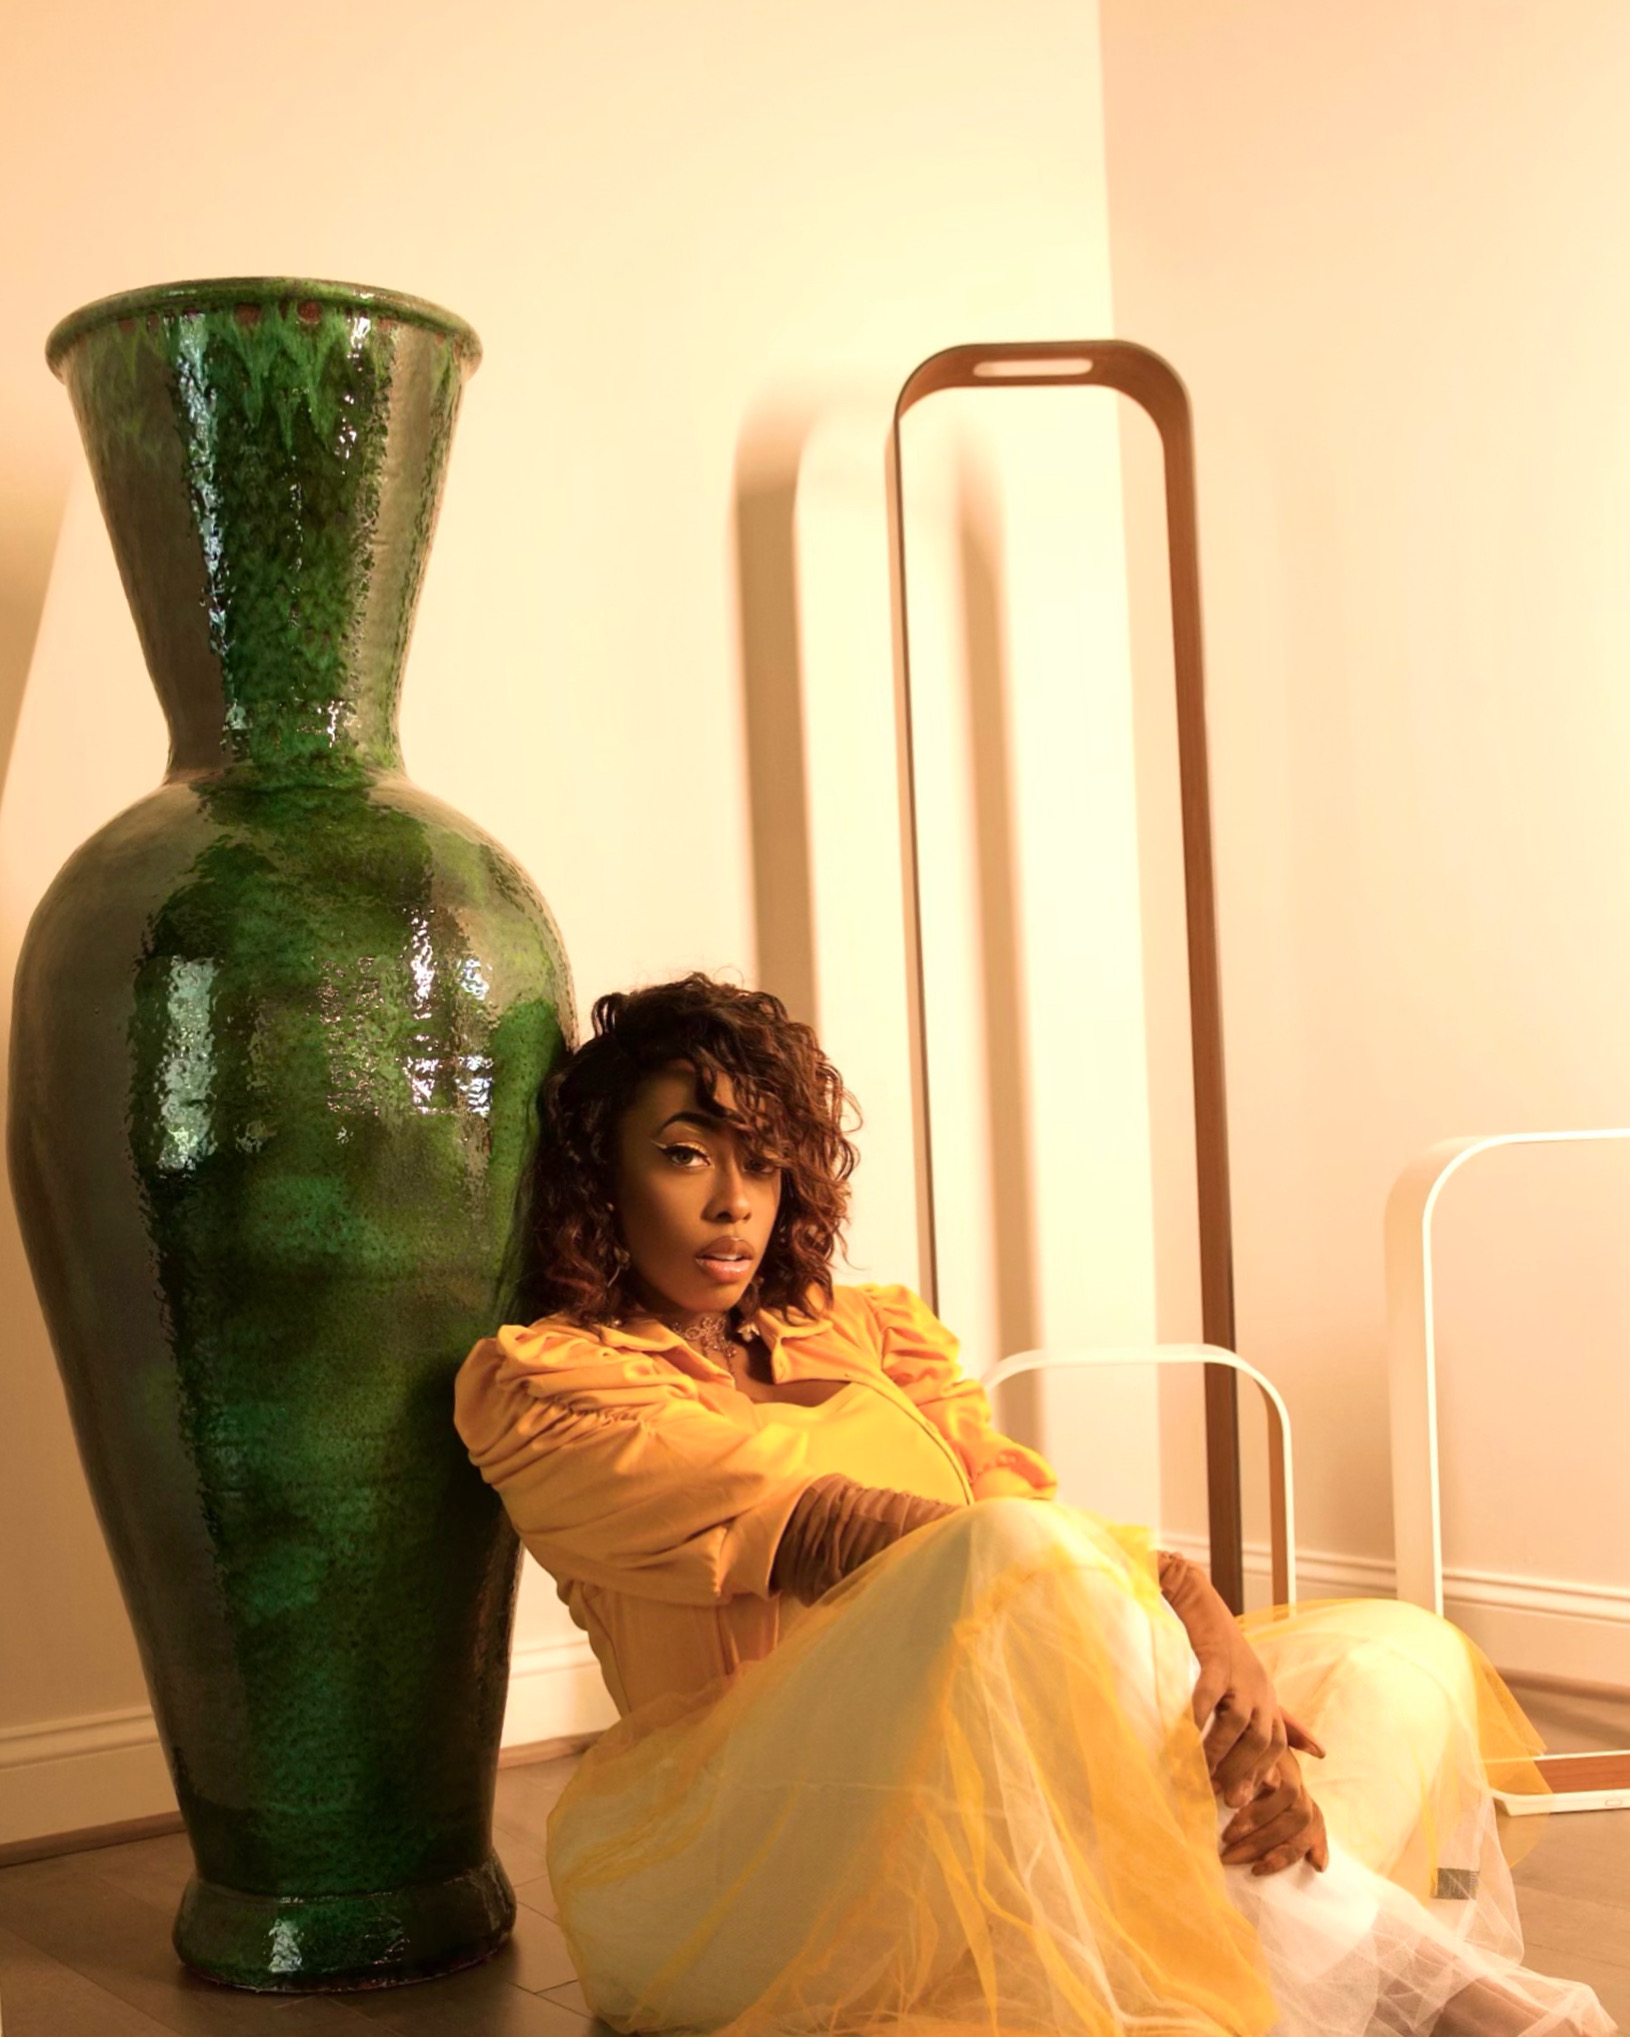 Promotional photo for "I Found It" which sees La Shana Latrice in a beautiful yellow dress, sitting on the floor and leaning against a huge gigantic green vase.